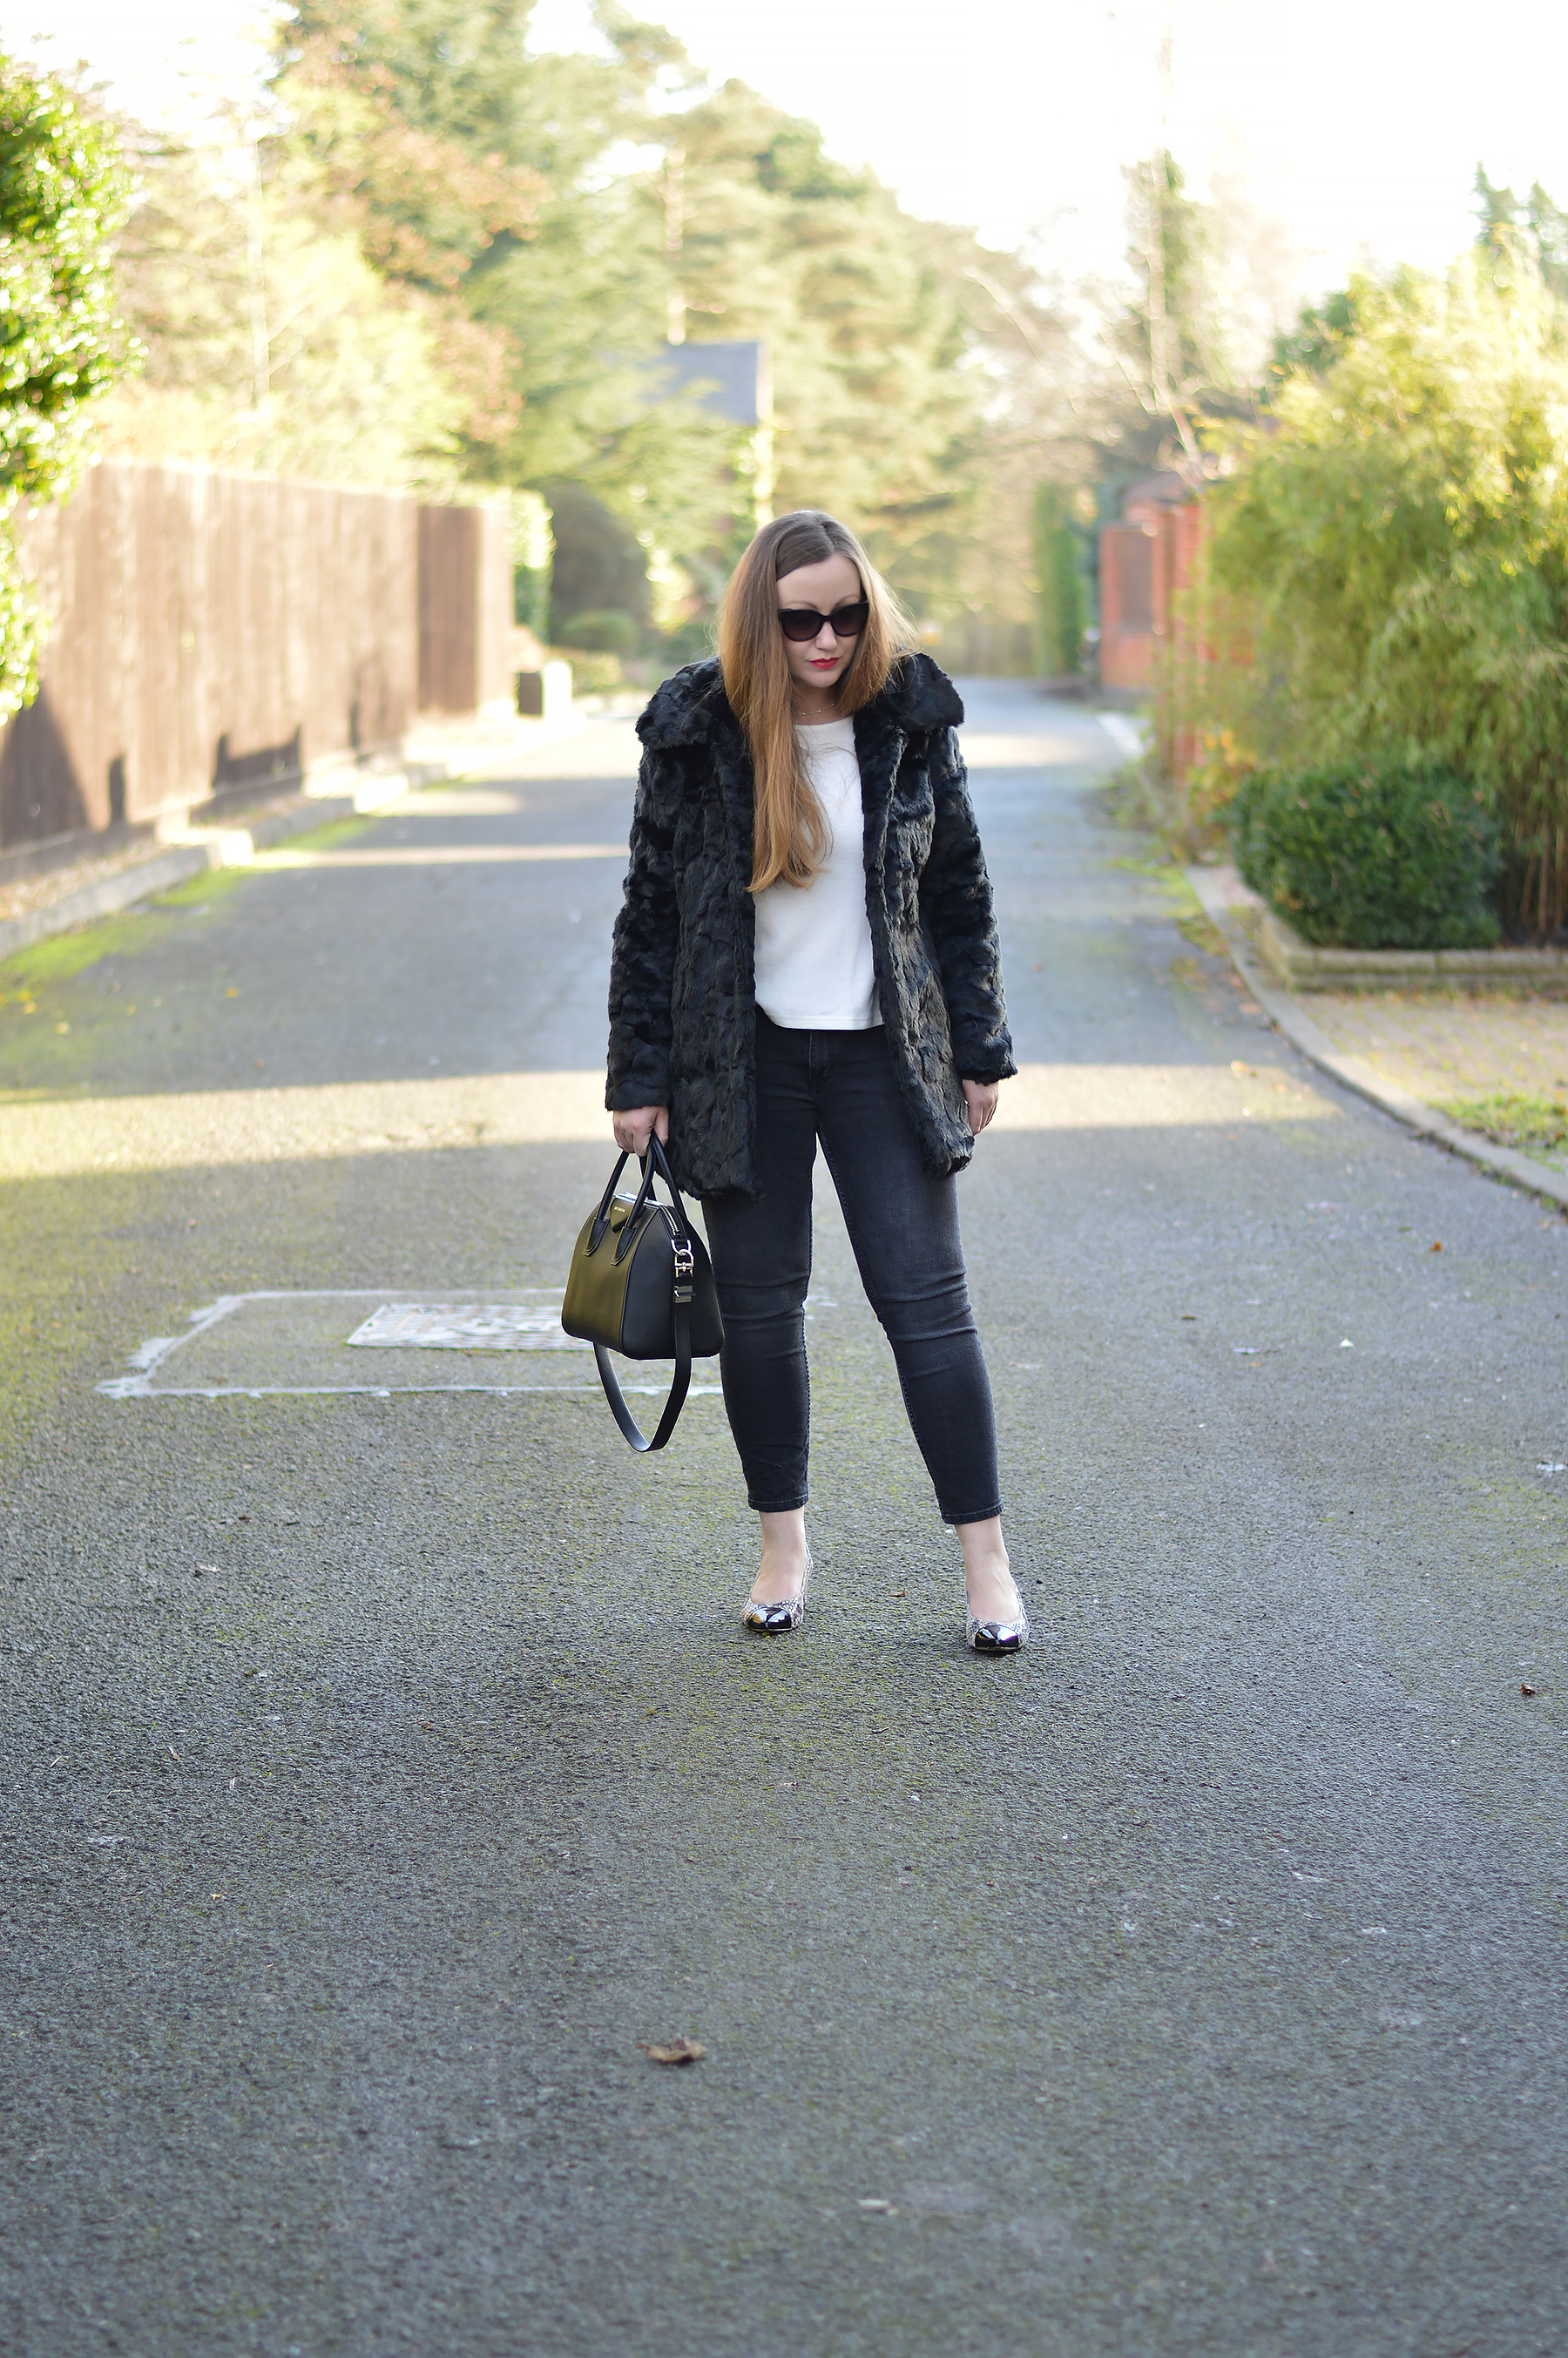 How to style a black fur coat